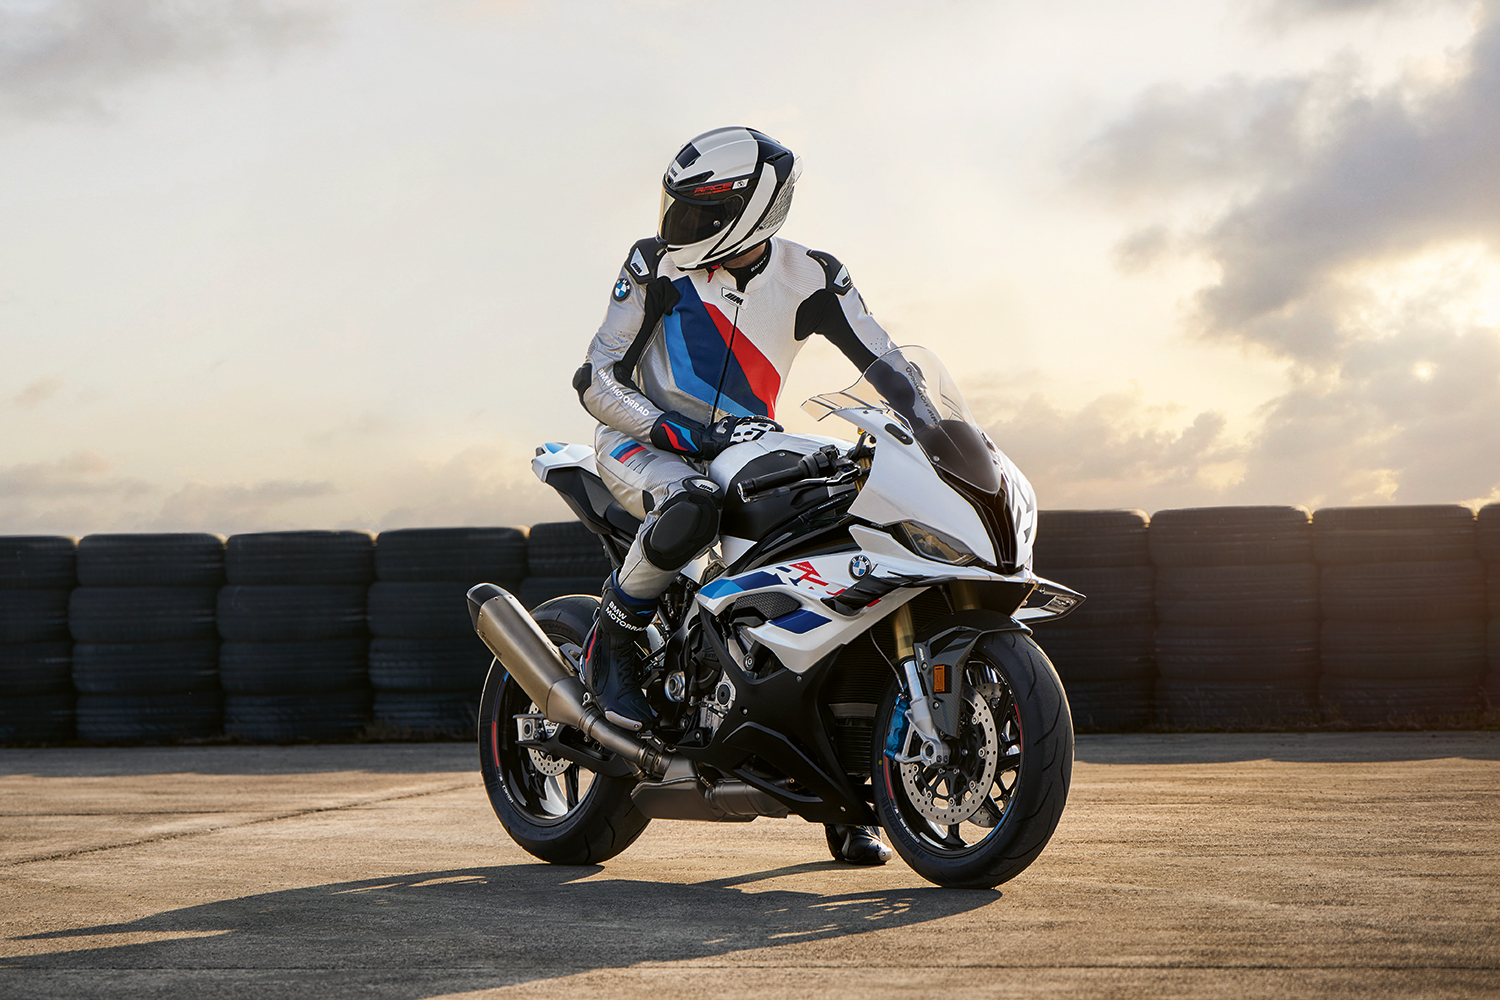 A 2023 BMW S 1000 RR motorcycle with a rider at a racetrack